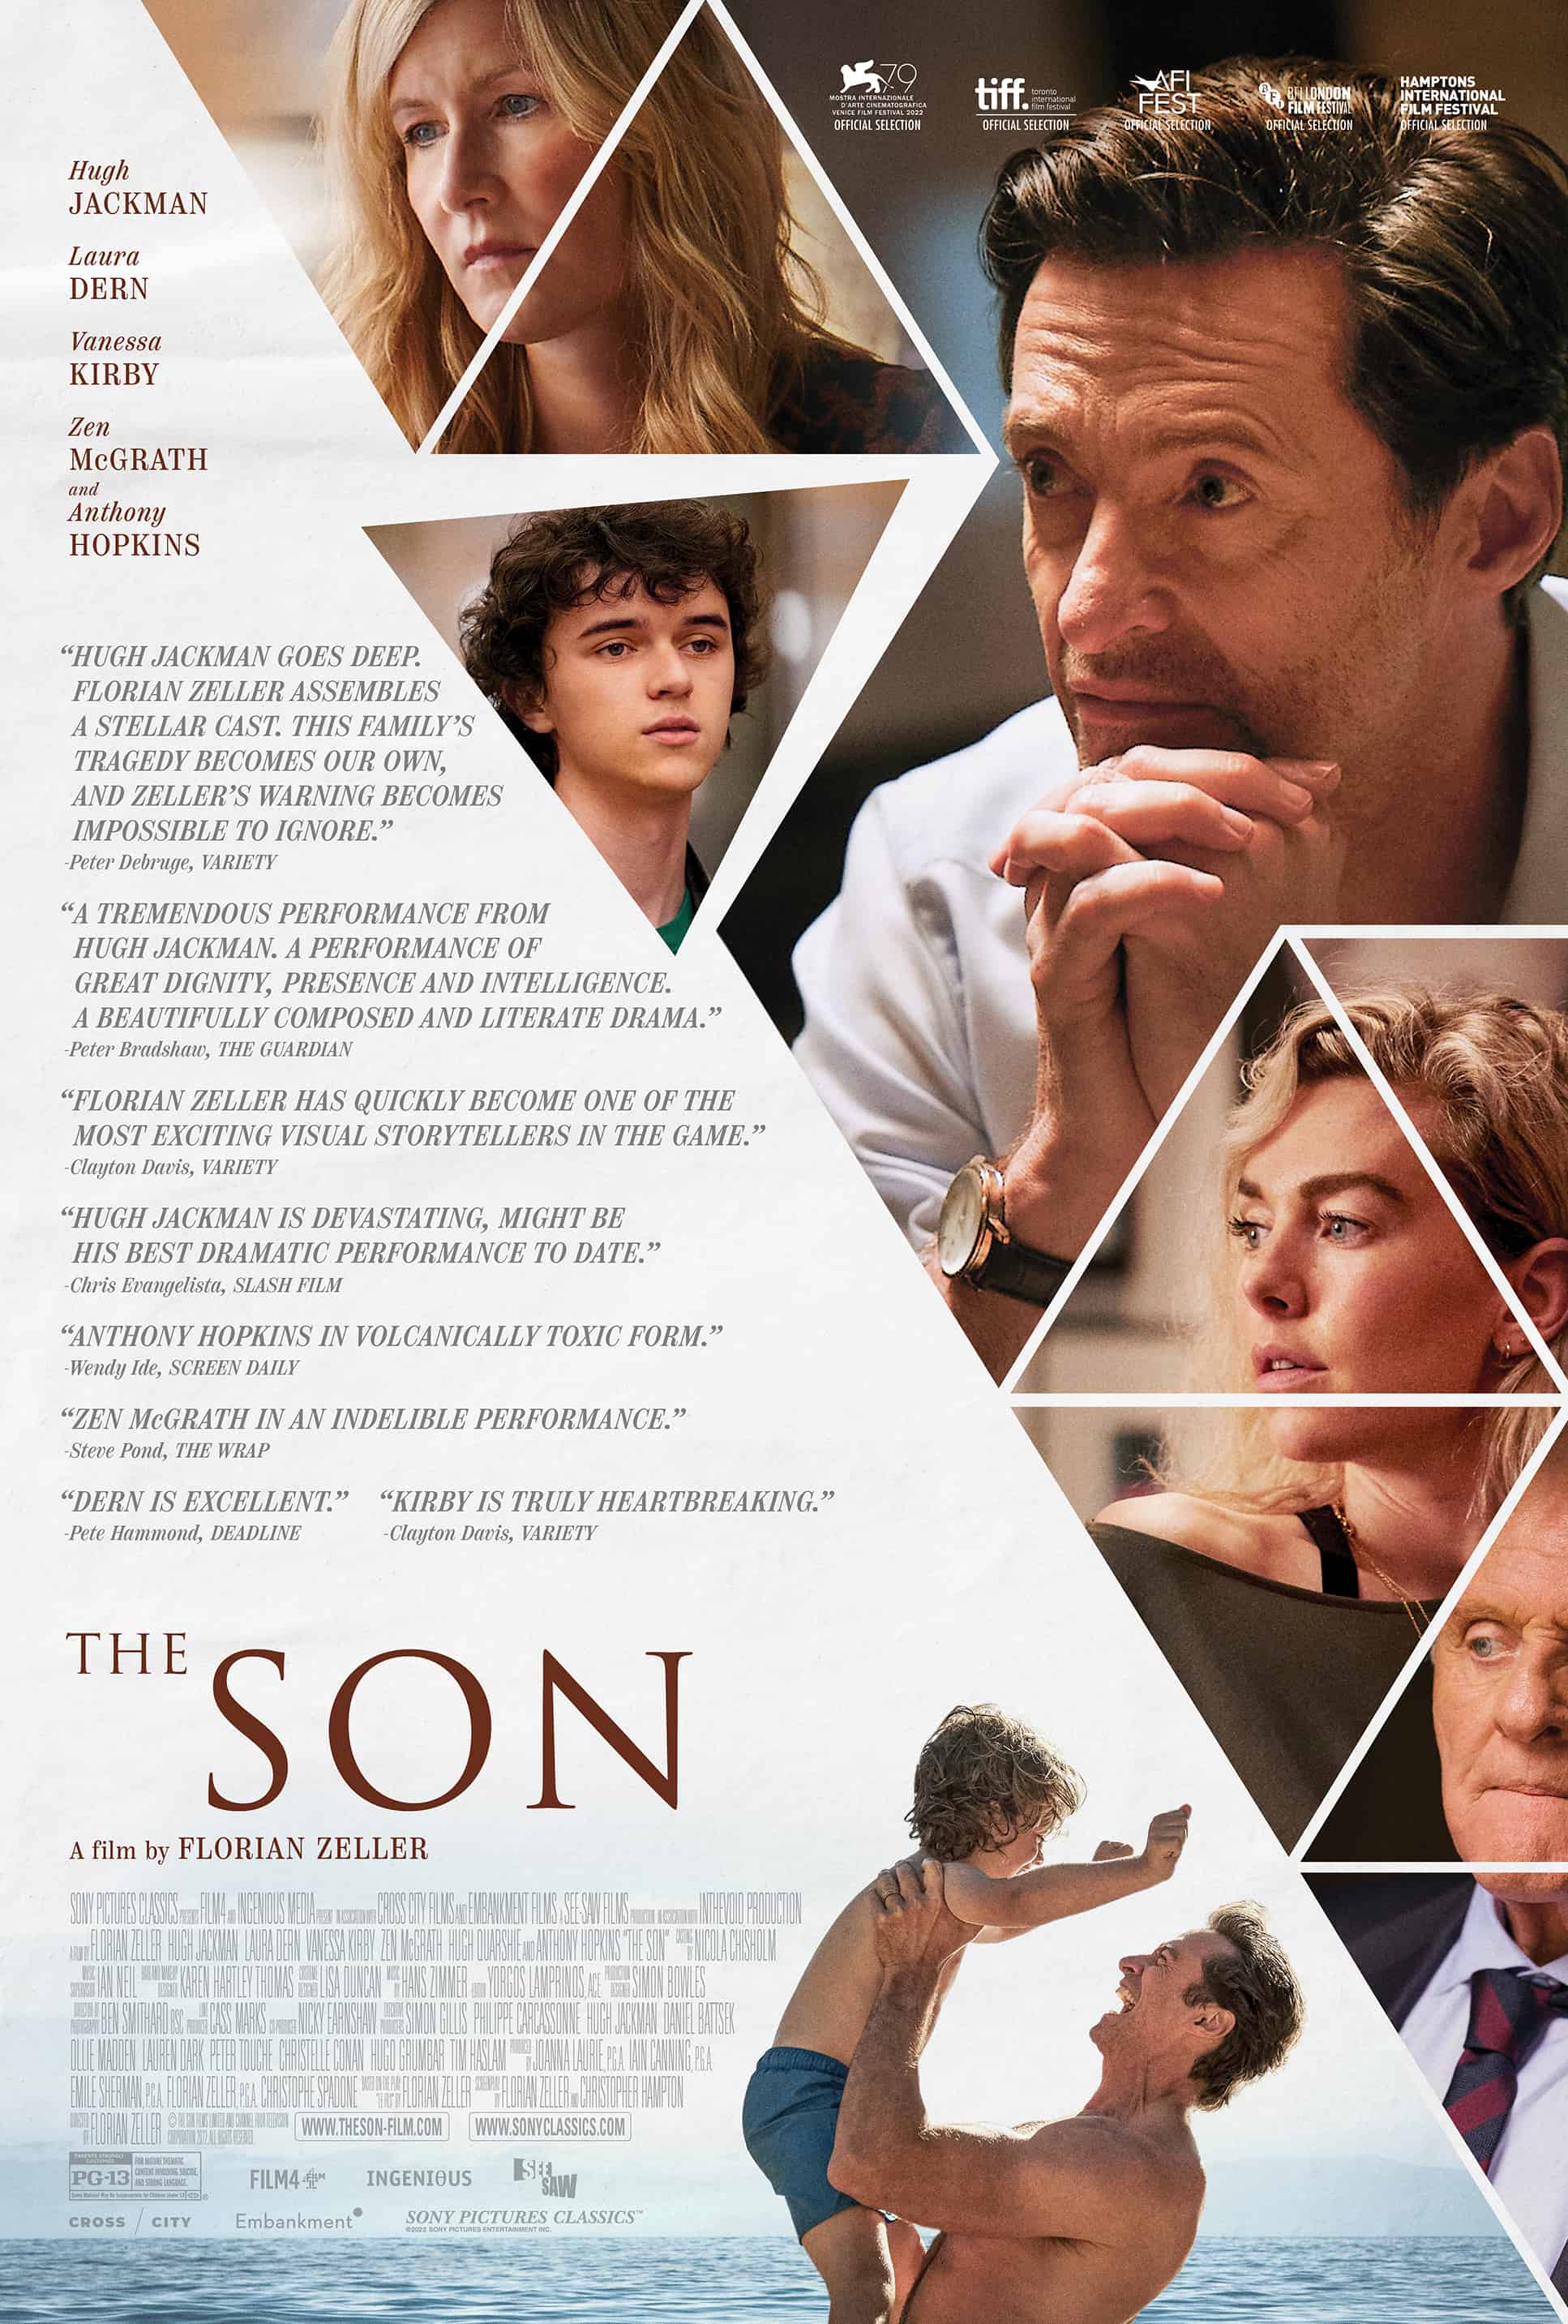 The Son Review